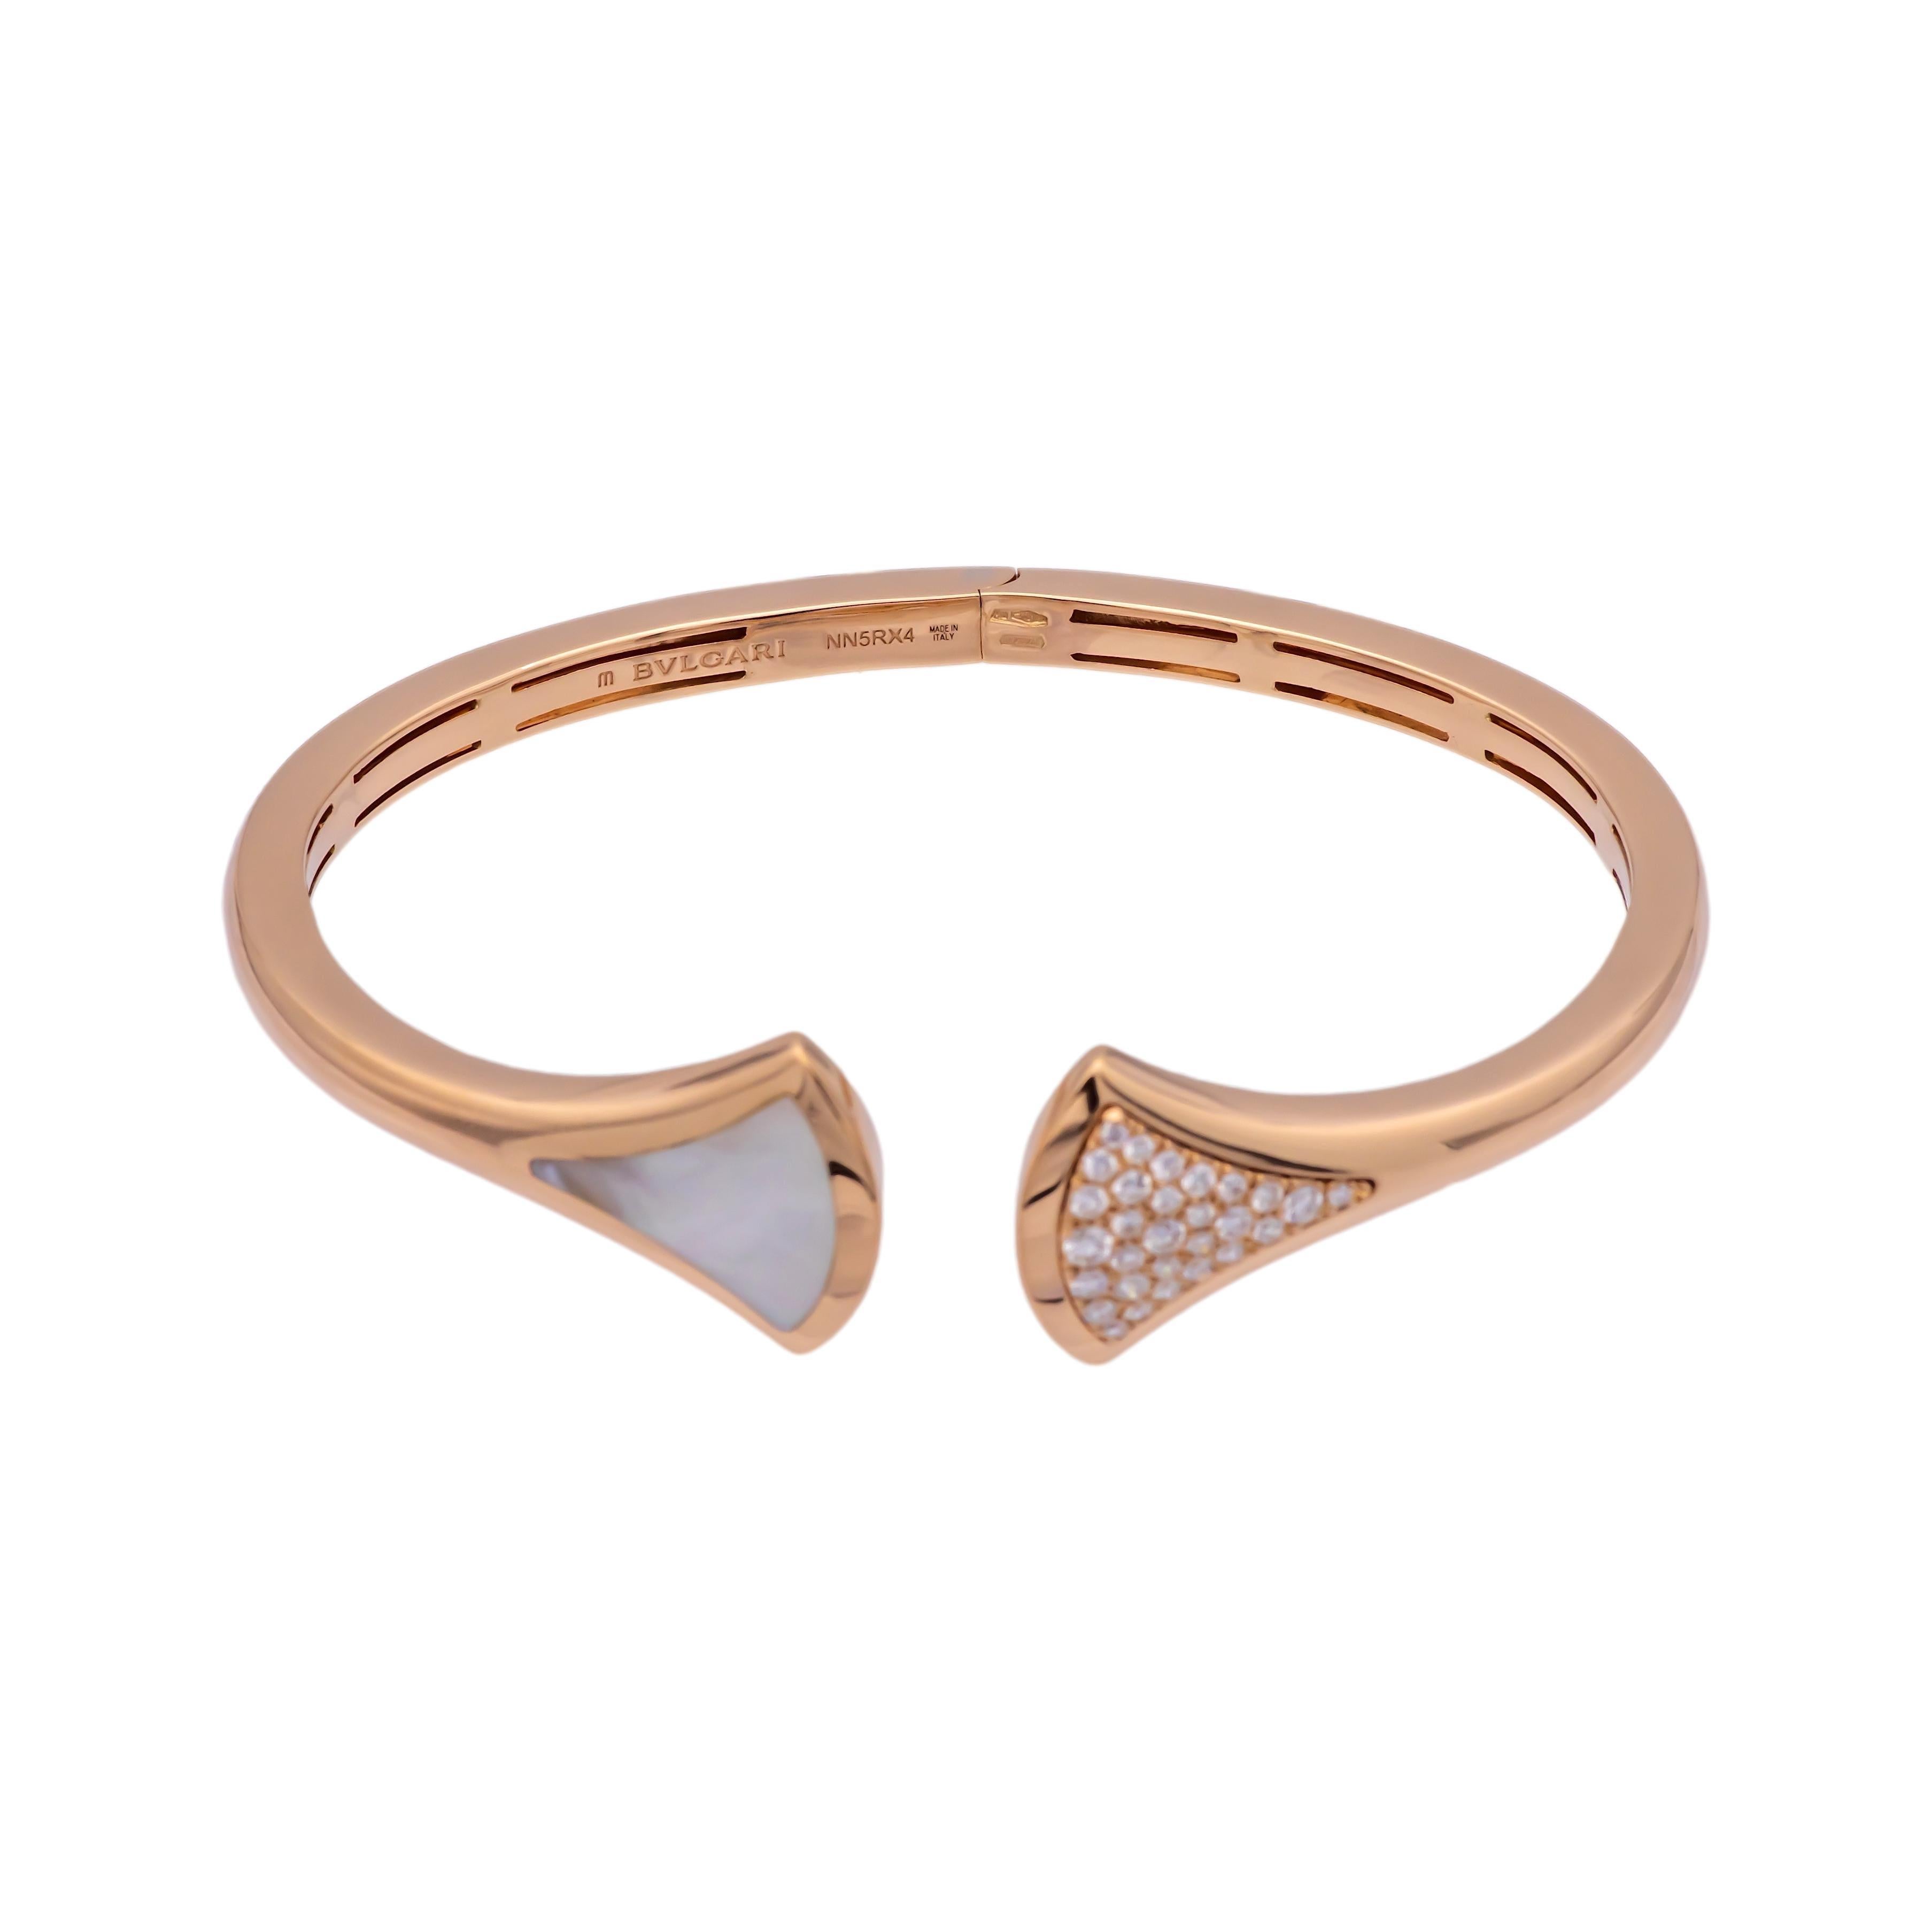 Bvlgari Diva's Dream 18K Rose Gold Diamond Open-Cuff Bracelet S/M In Excellent Condition For Sale In New York, NY